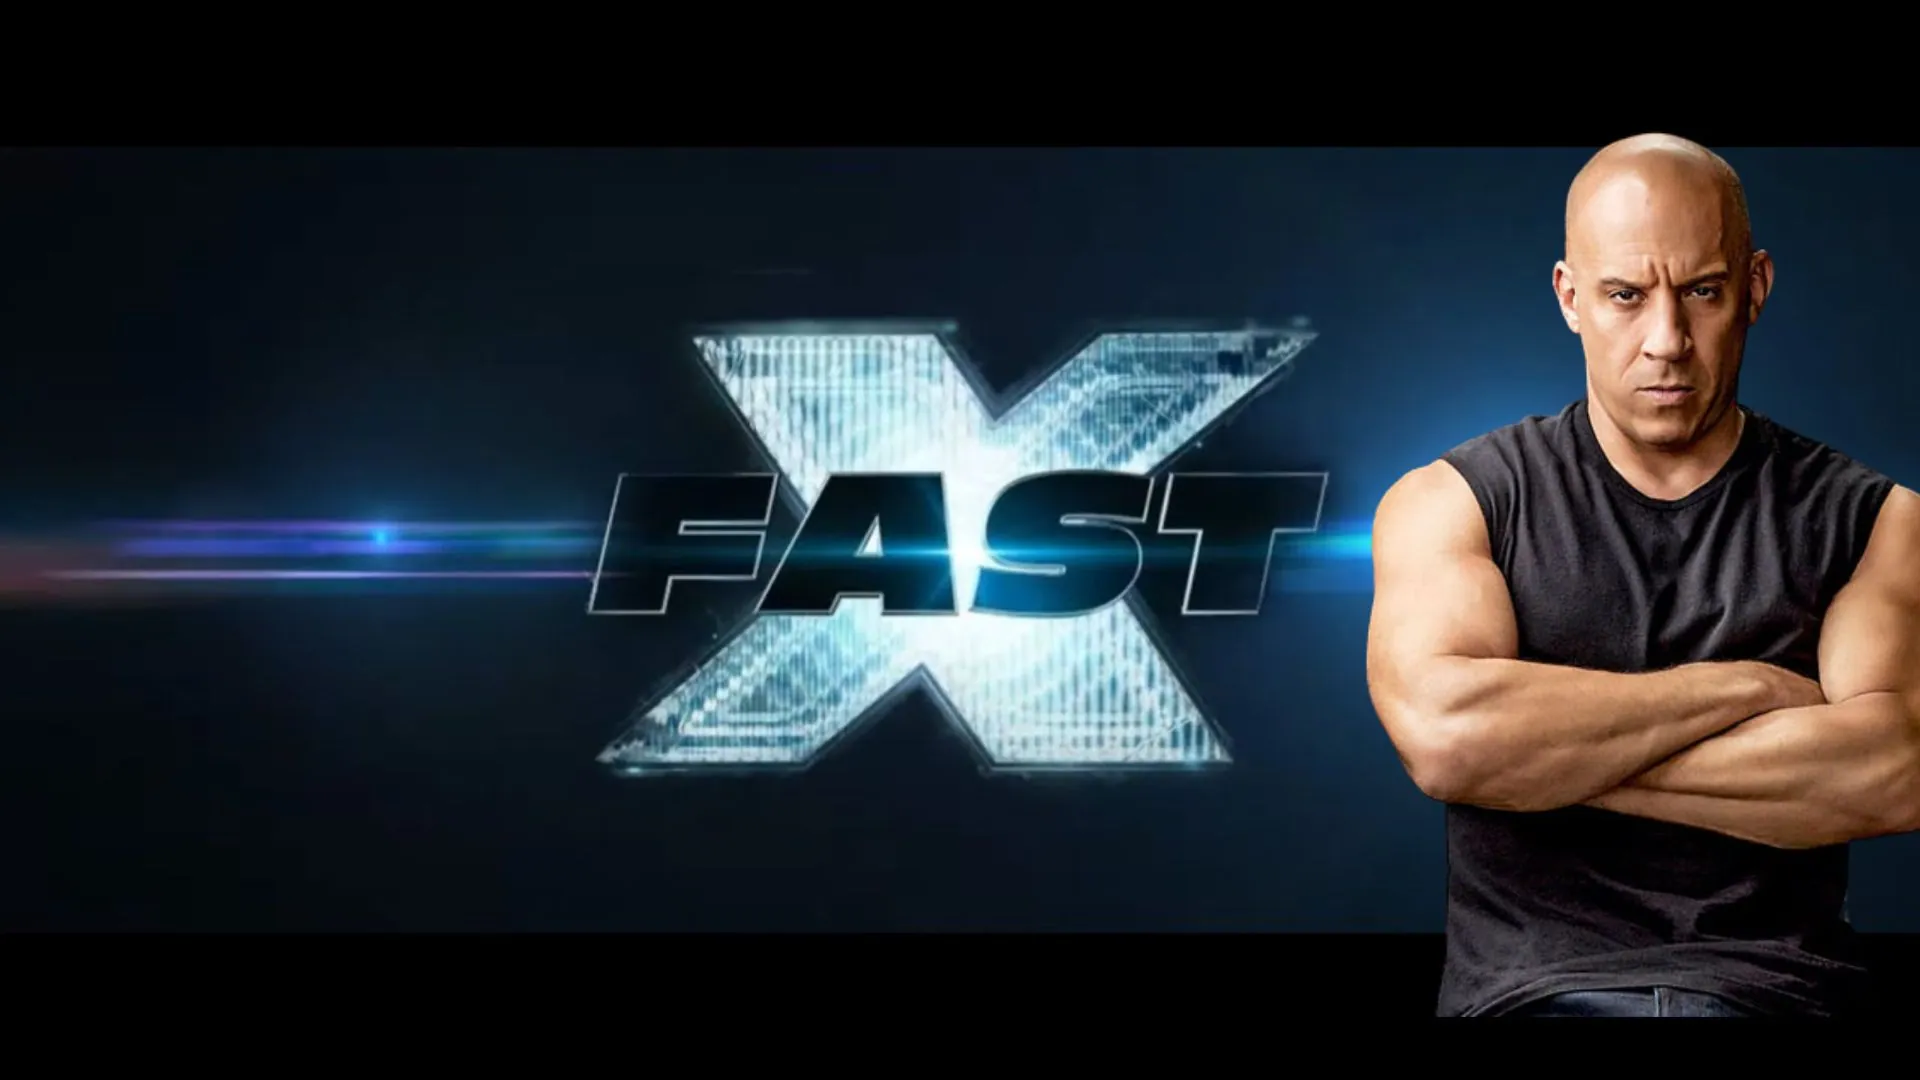 Fast X is given a 12A age rating